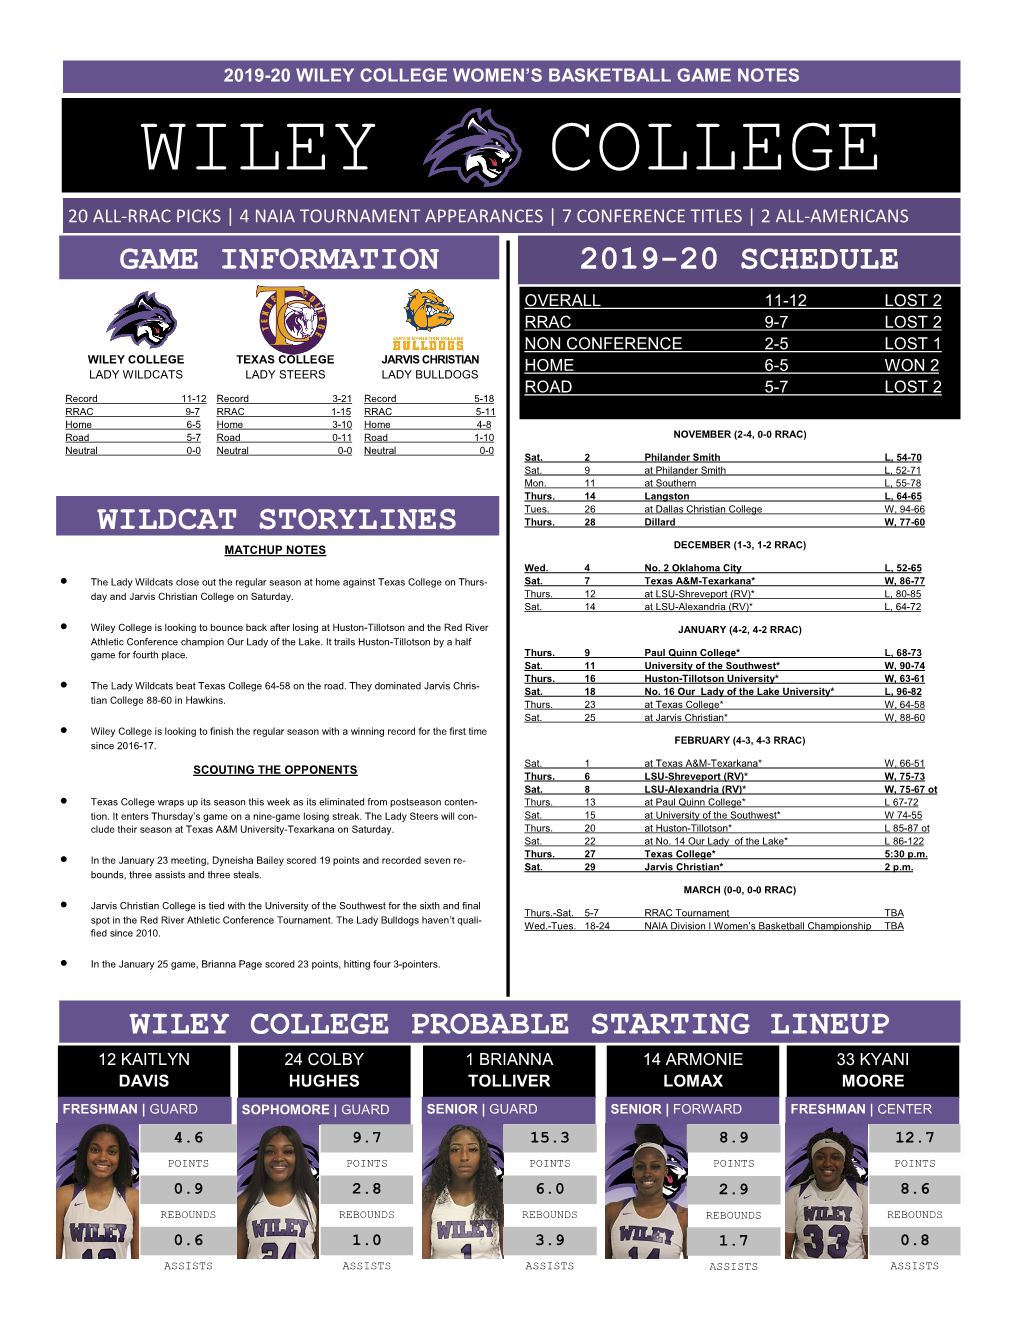 Game Notes Wiley College